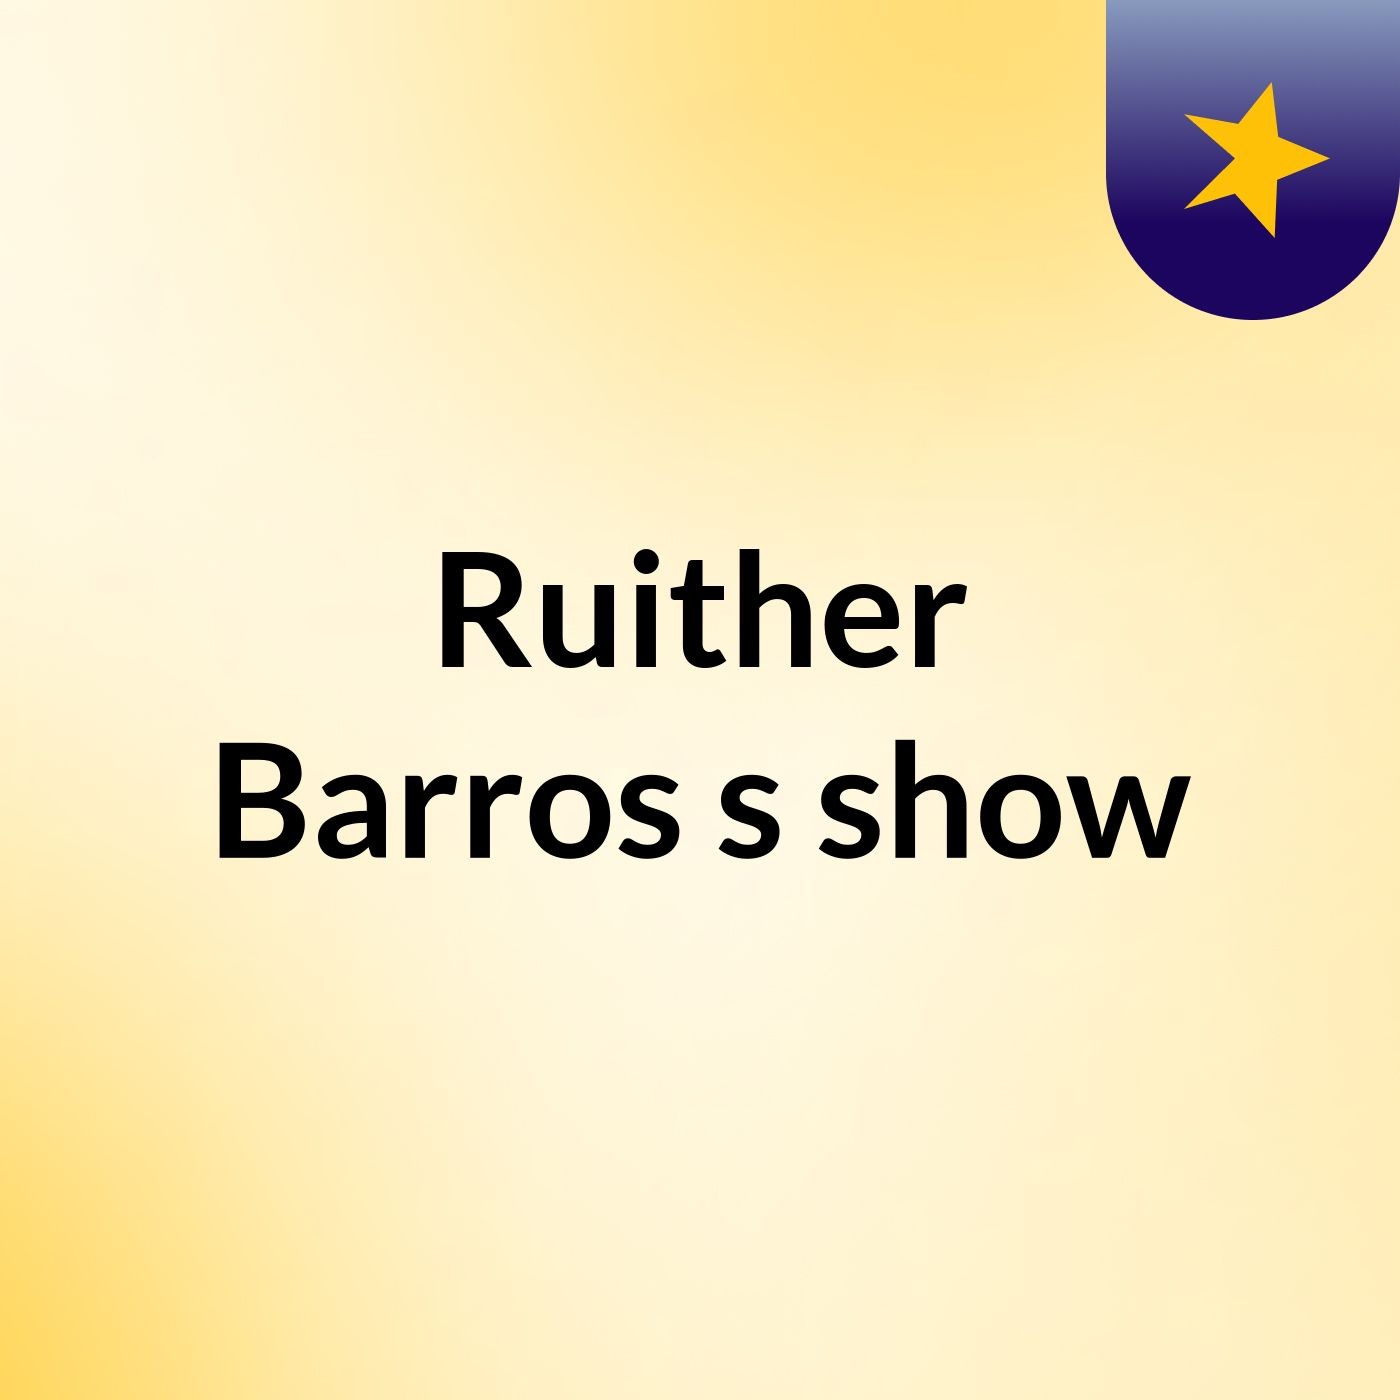 Ruither Barros's show